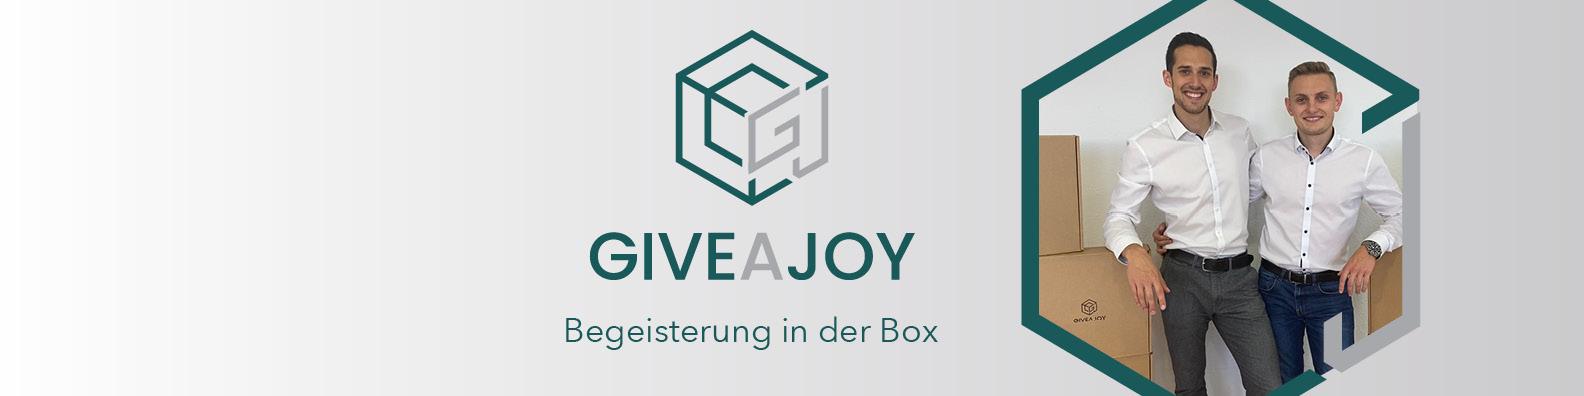 GIVEAJOY / startup from Berlin / Background